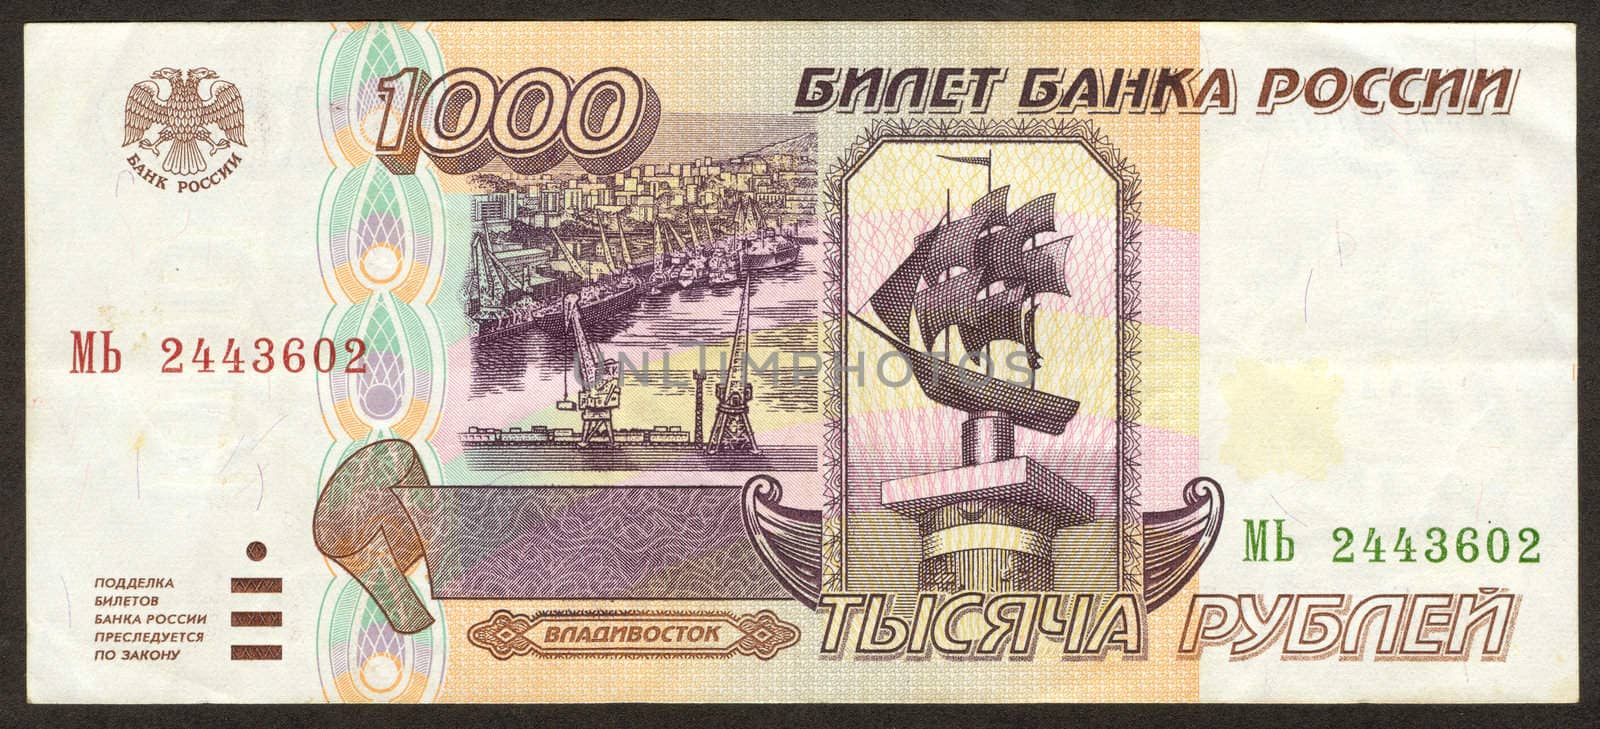 The scanned image of Russian money. One thousand are made in 1995.